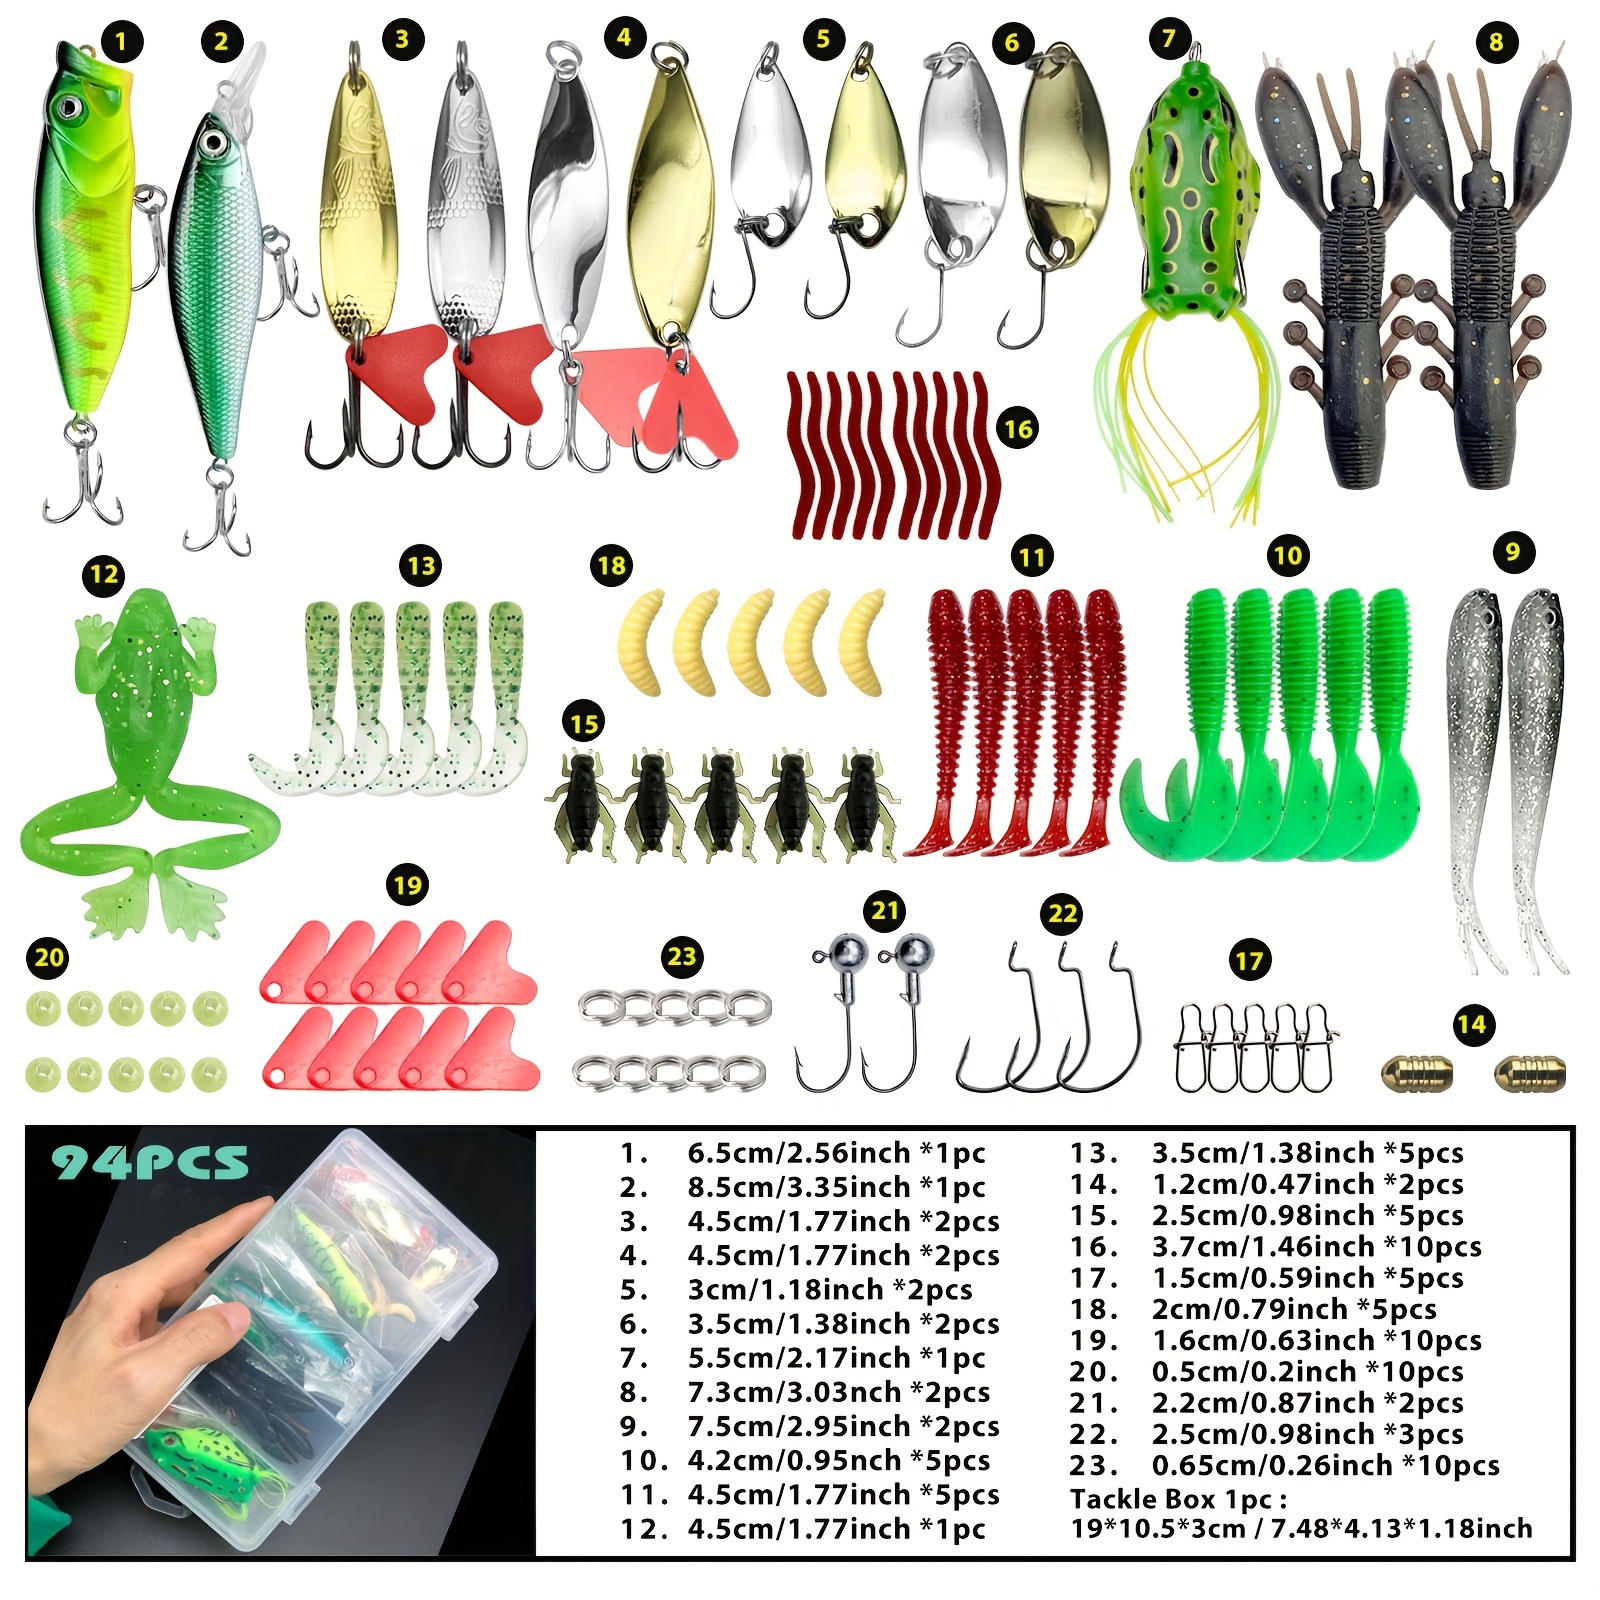 SUPERTHEO Fishing Lure Set Fishing Spoons Frog Lures Soft Hard Metal Lure  Crank Popper Minnow Pencil Jig Hook for Trout Bass Salmon with Tackle Box